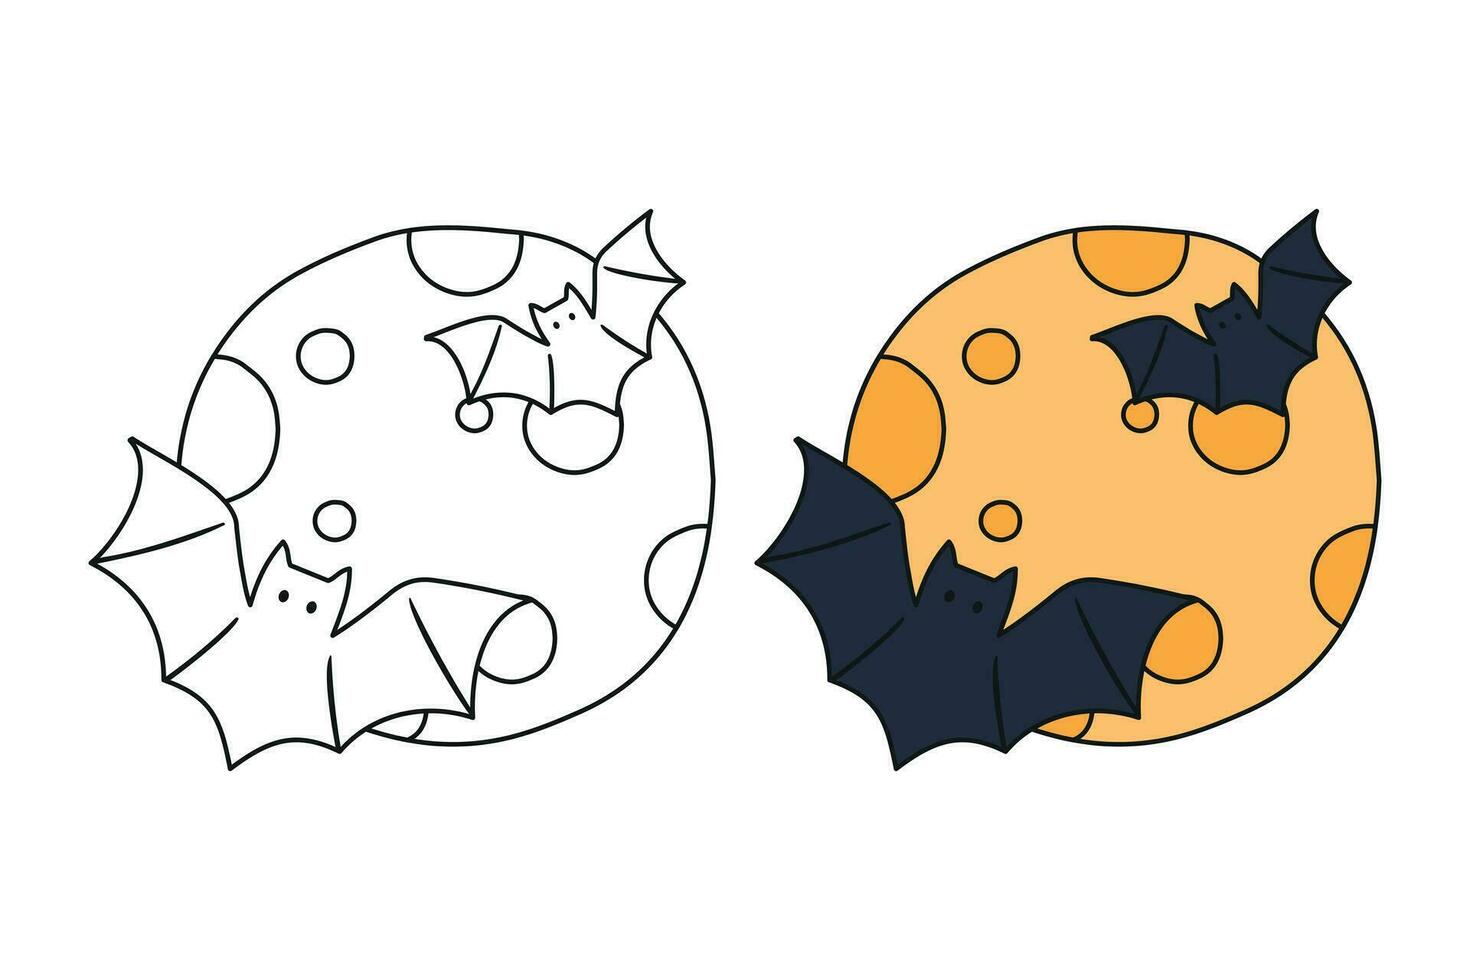 Cute cartoon yellow moon with bats coloring book for children. vector